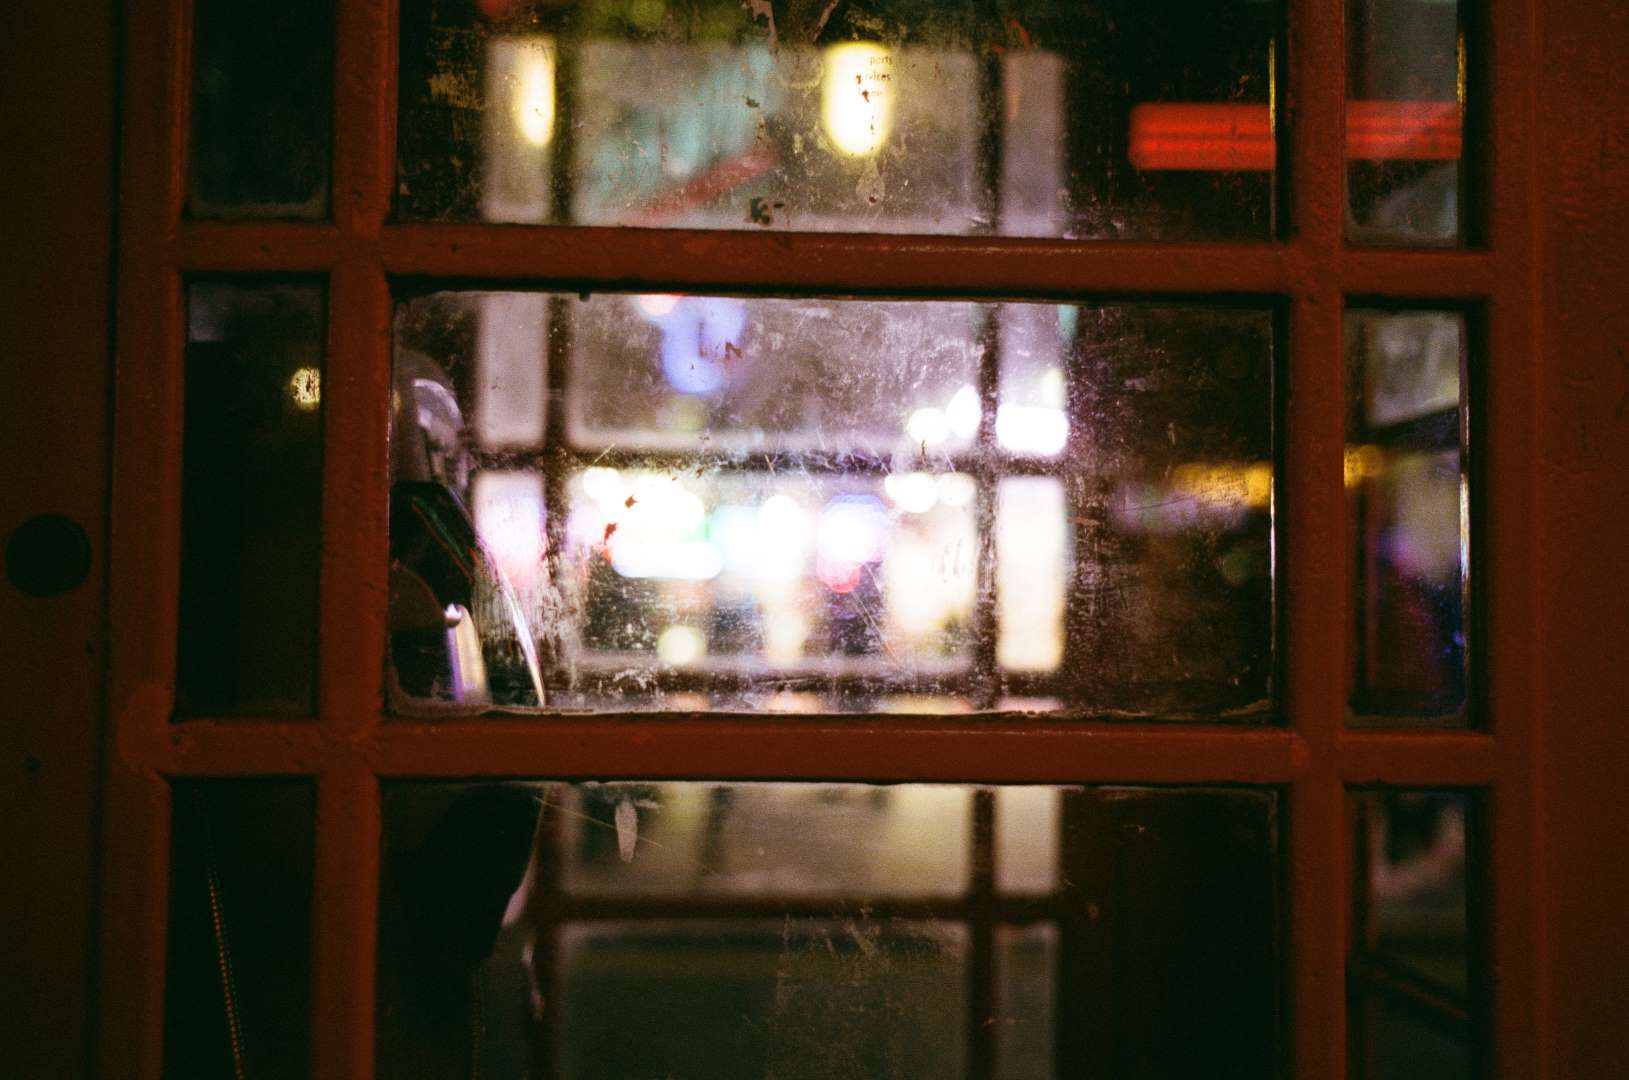 A colour photograph of a British phone booth at night